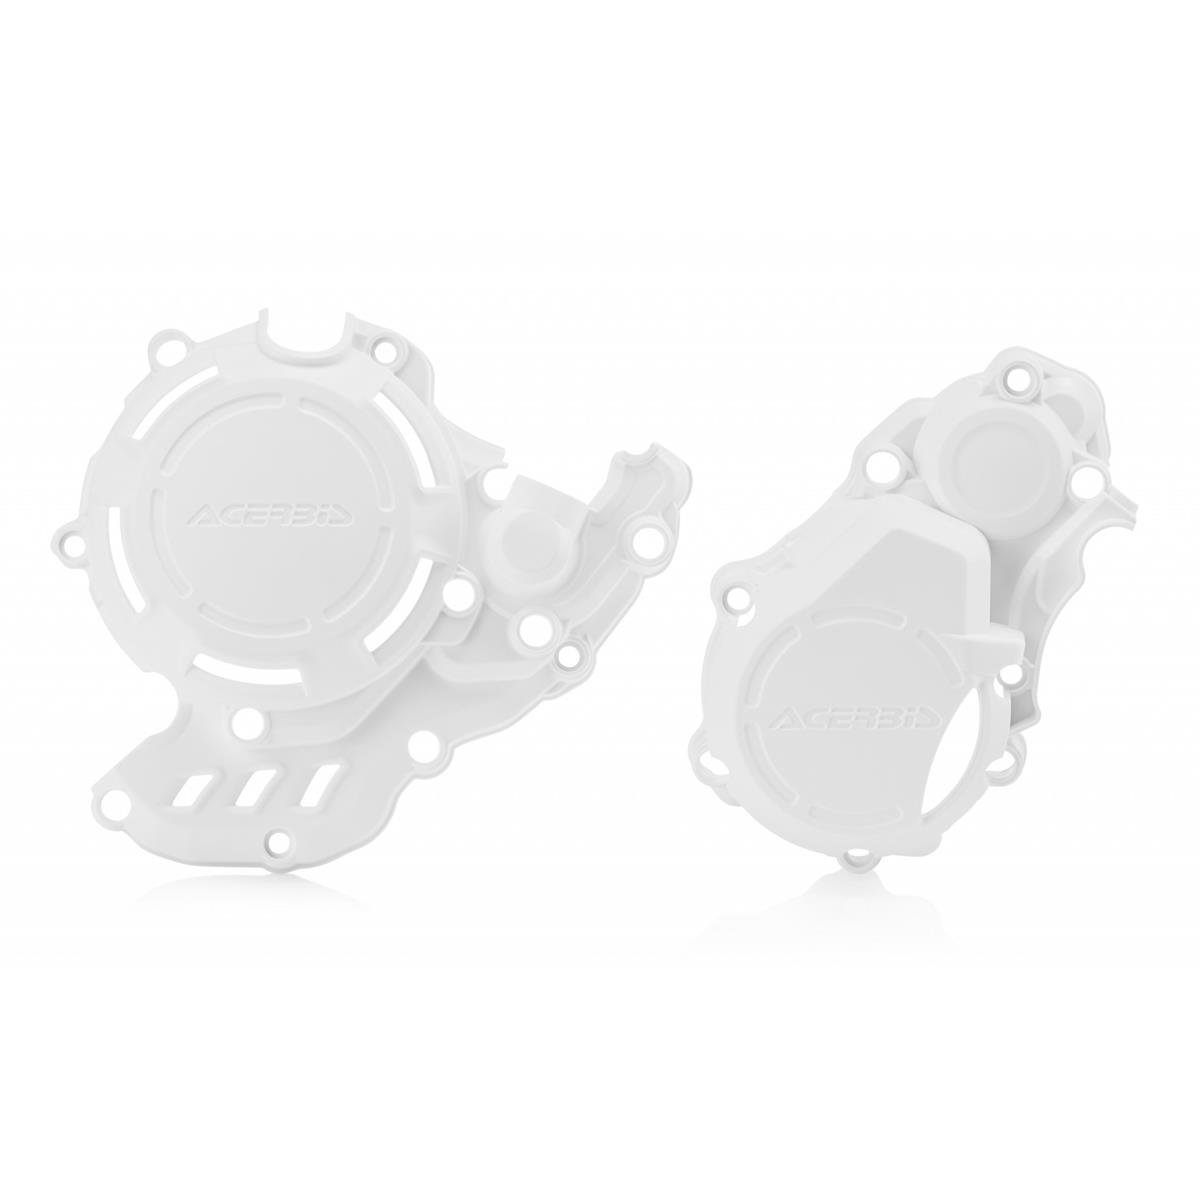 Acerbis Clutch/Ignition Cover Protection X-Power KTM EXC-F 350 17-, Husqvarna FE 250/350 17-, Gas Gas EC 250F/350F, White